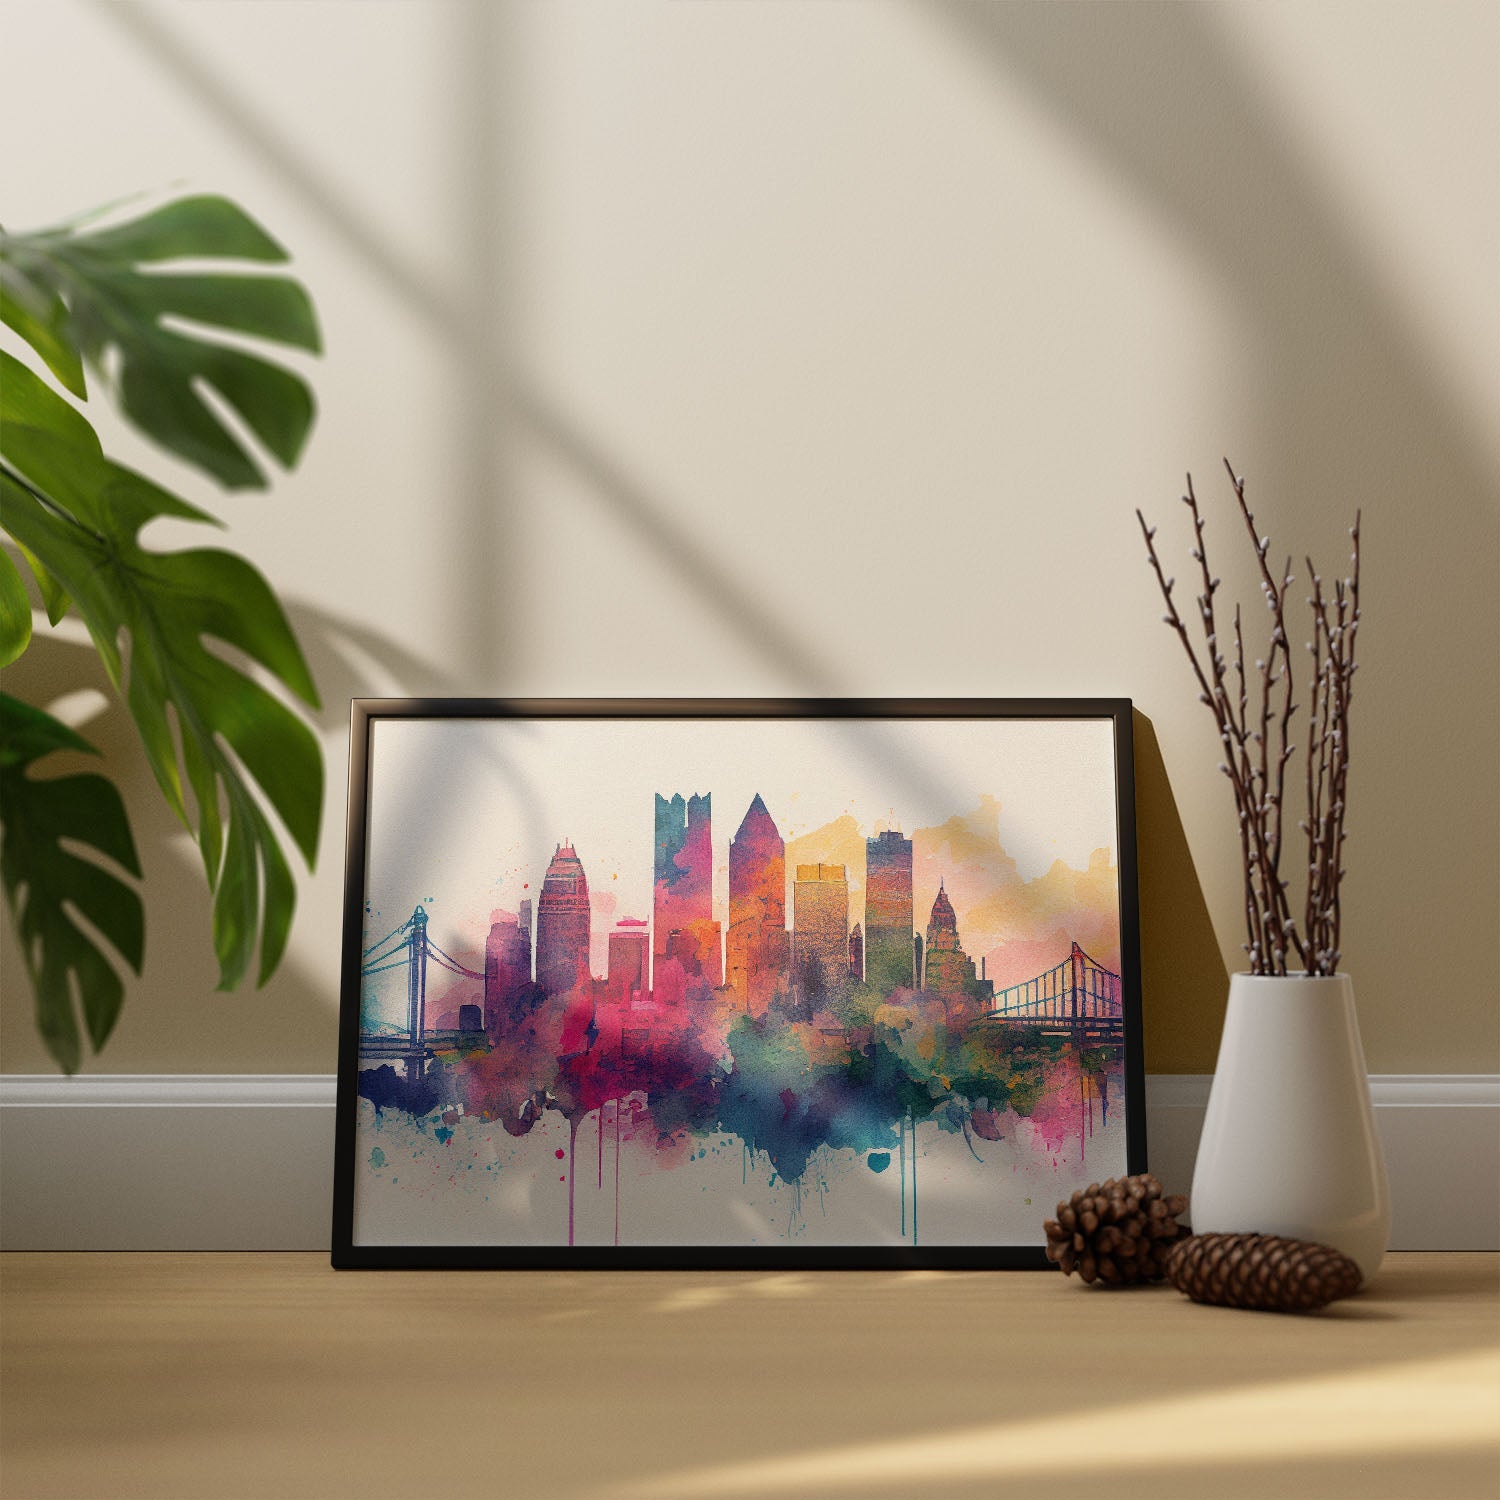 Nacnic watercolor of a skyline of the city of Pittsburgh. Aesthetic Wall Art Prints for Bedroom or Living Room Design.-Artwork-Nacnic-A4-Sin Marco-Nacnic Estudio SL